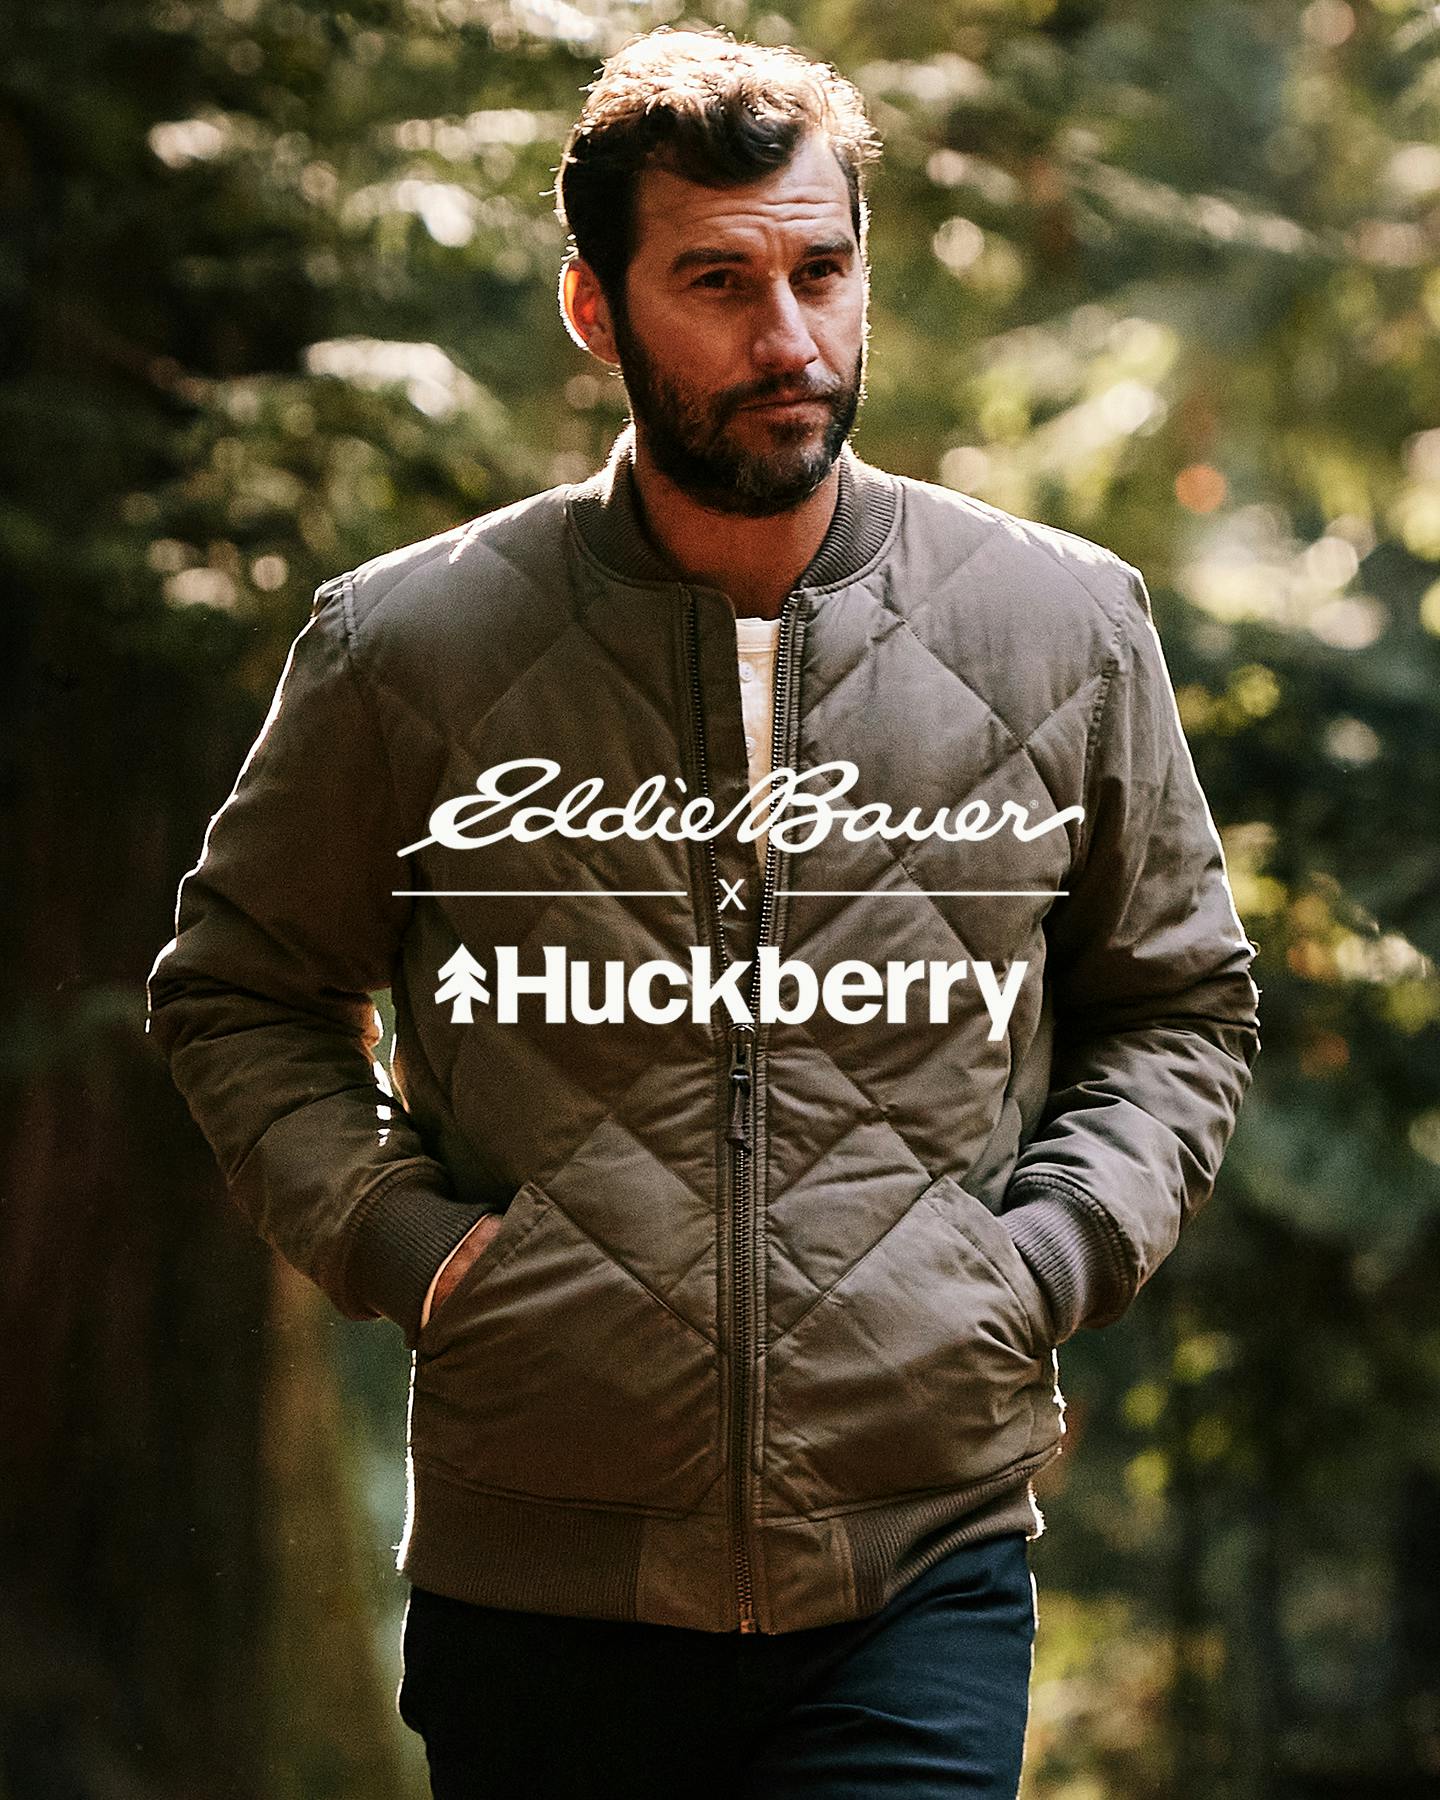 Man in Woods Wearing Jacket with Huckberry and Eddie Bauer logo on top